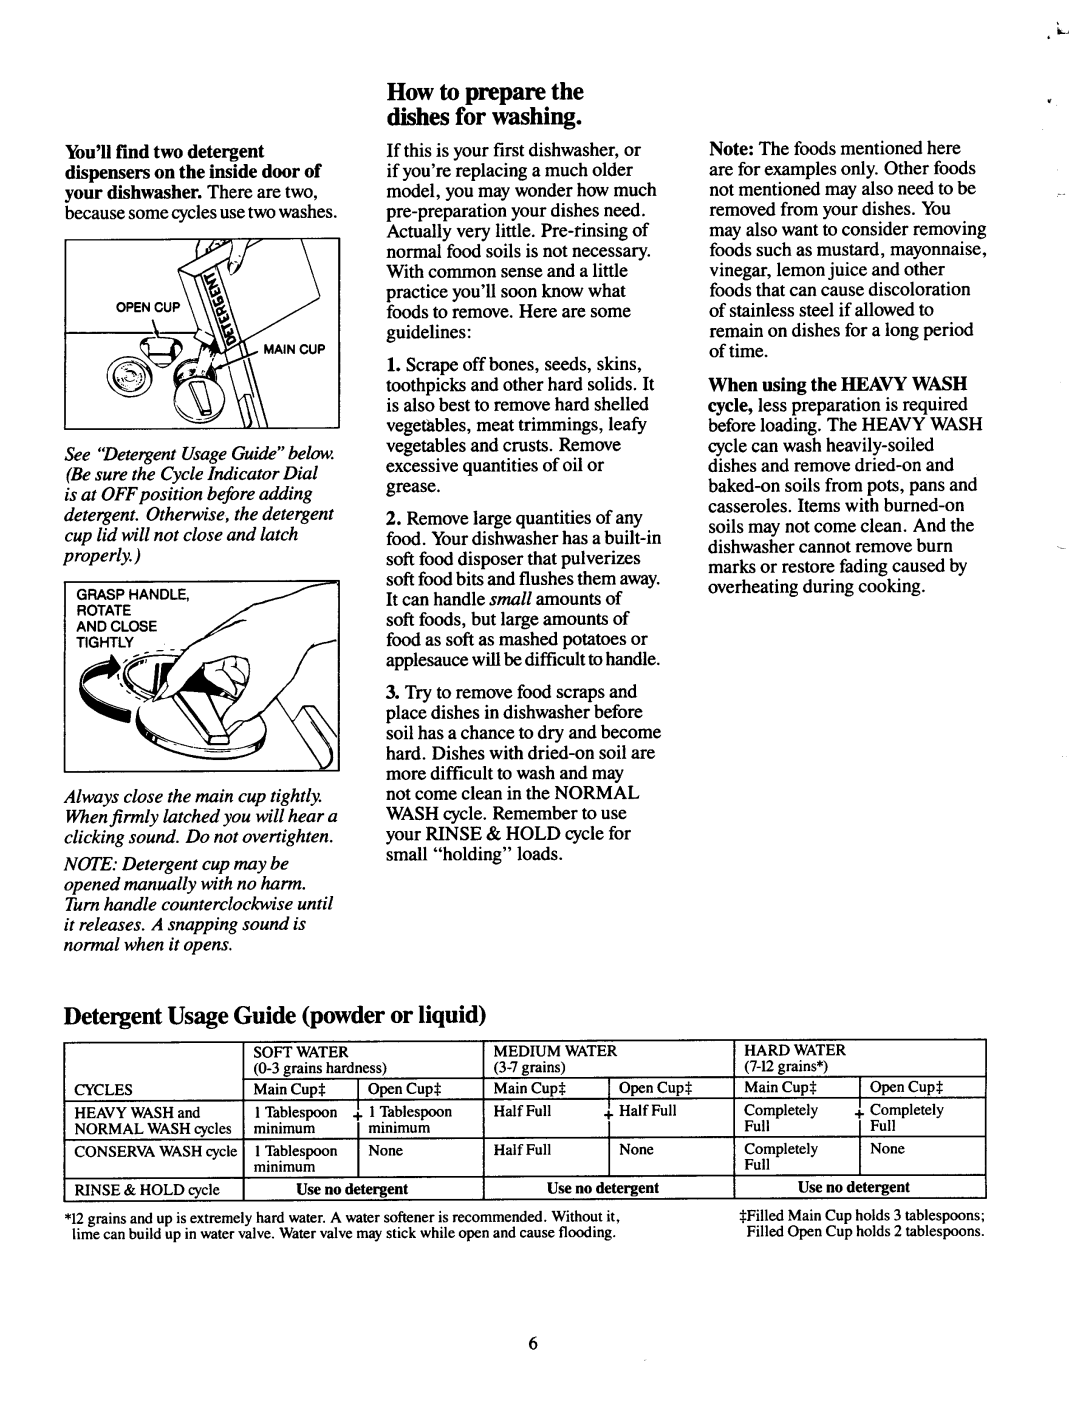 Jenn-Air DU466, DU460 operating instructions How to prepare the dishes for washing, Detergent Usage Guide powder or liquid 